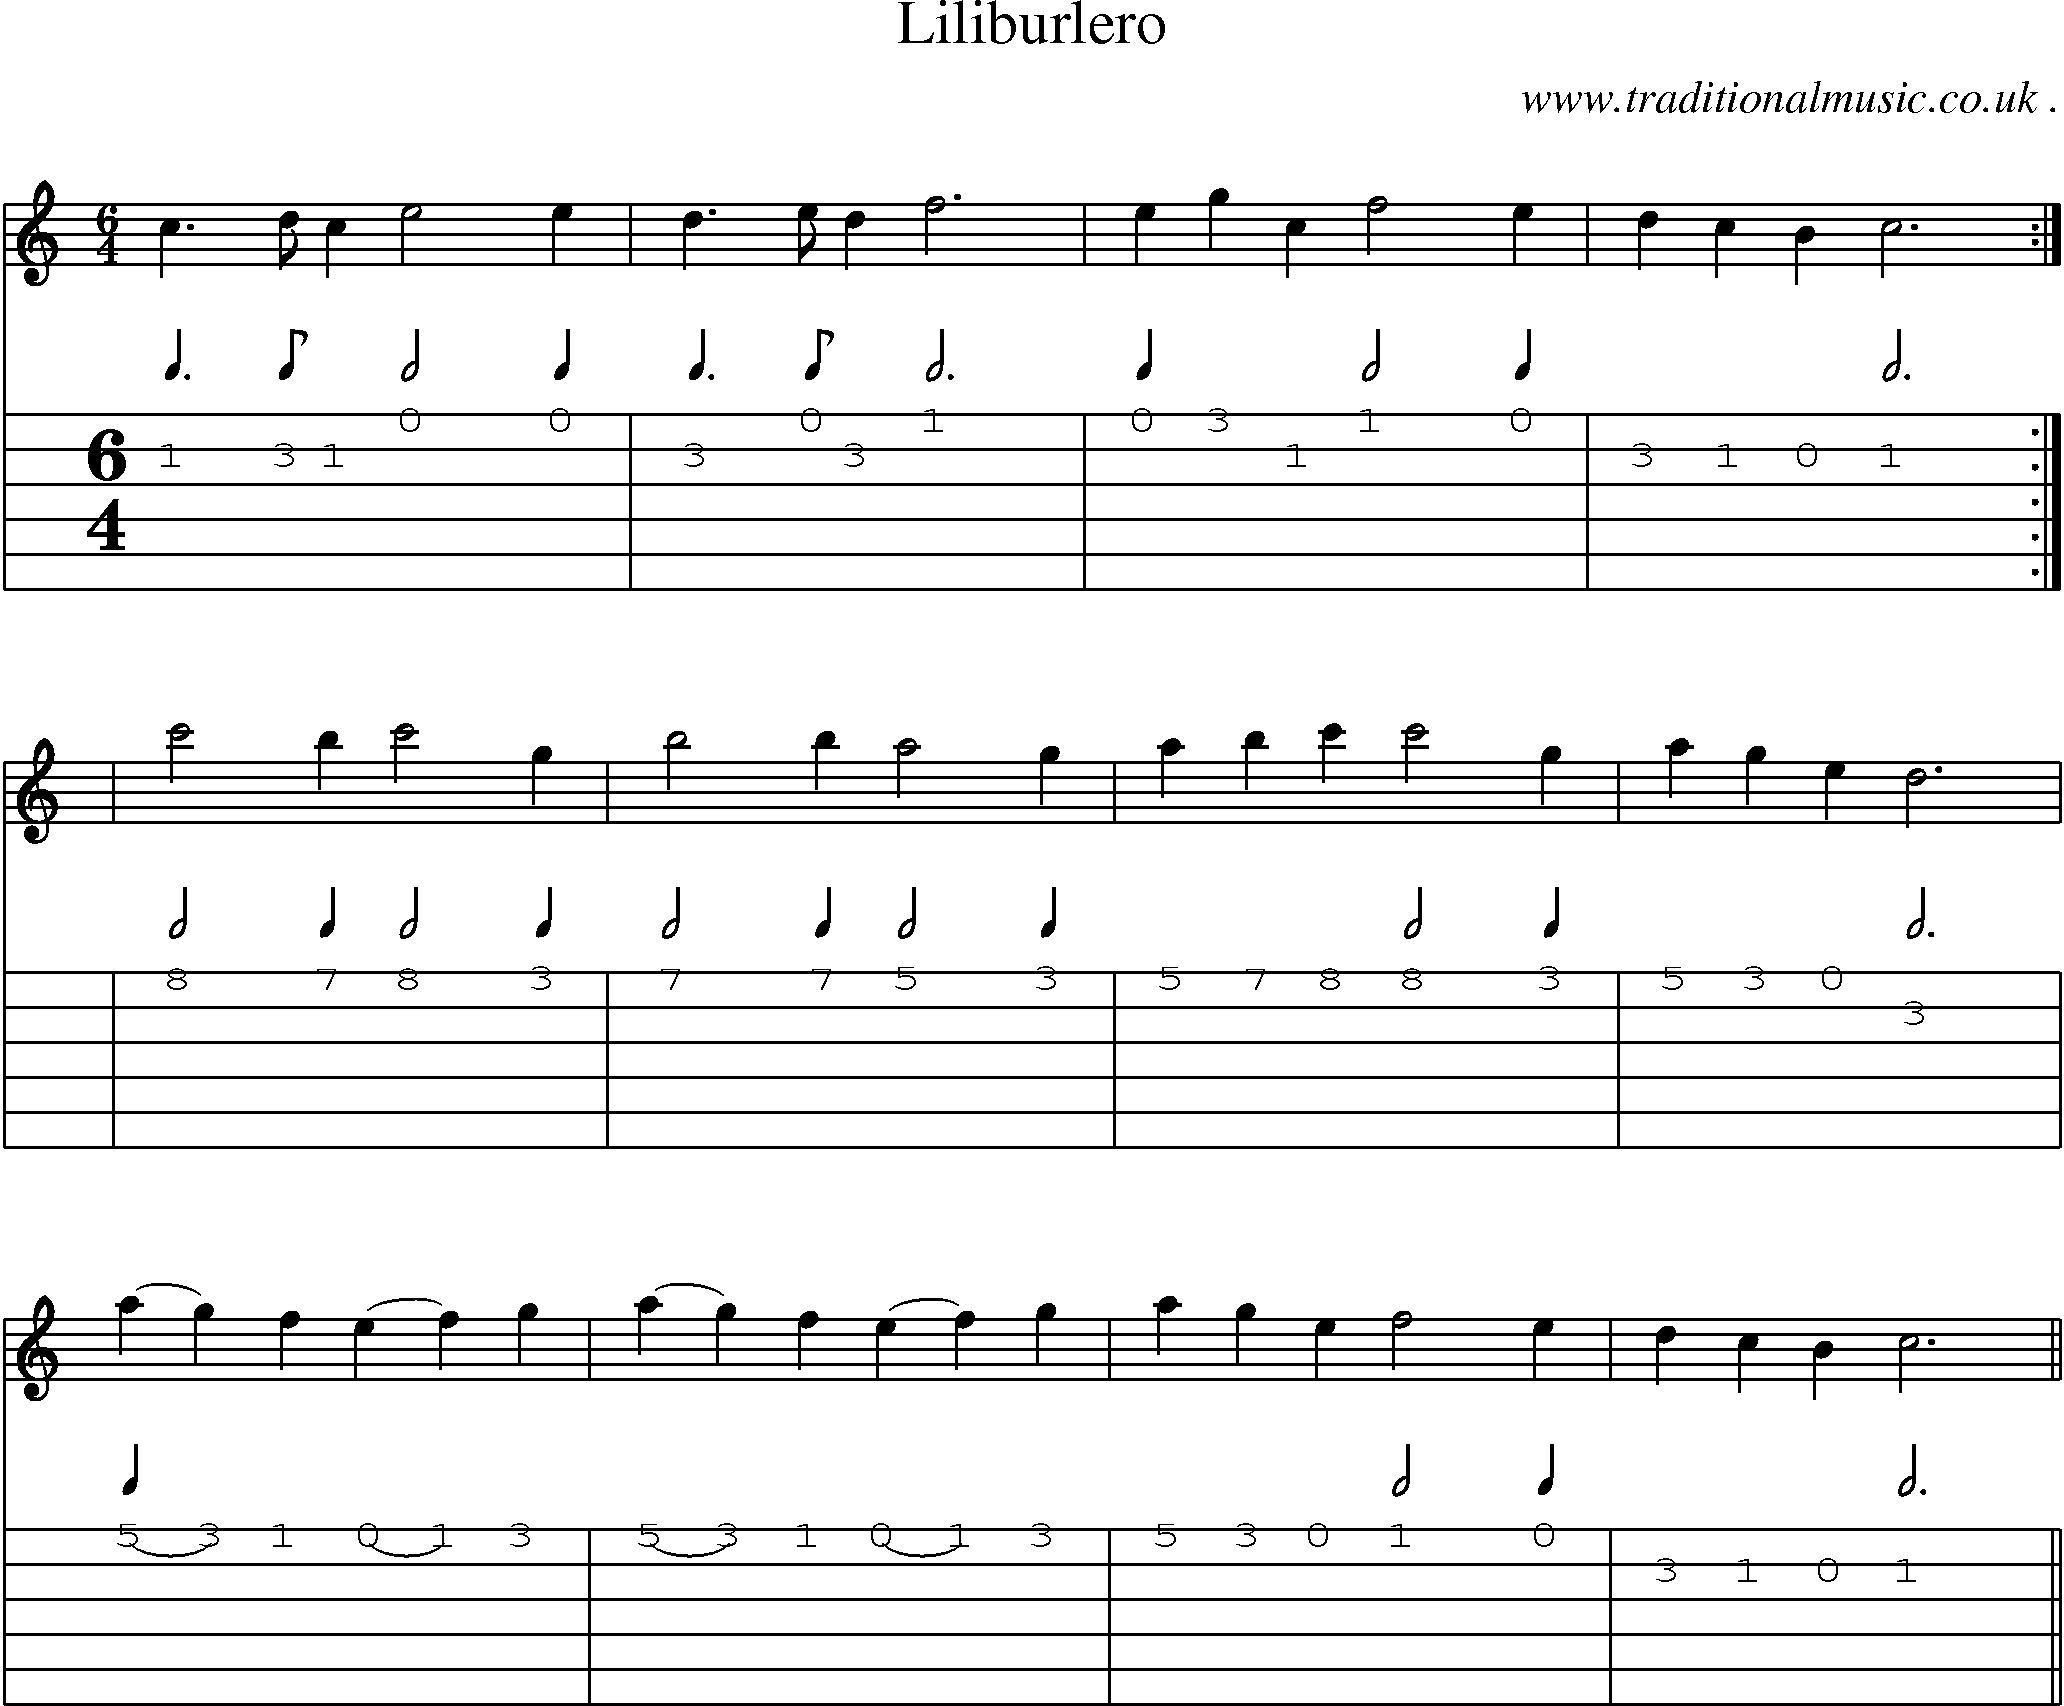 Sheet-Music and Guitar Tabs for Liliburlero